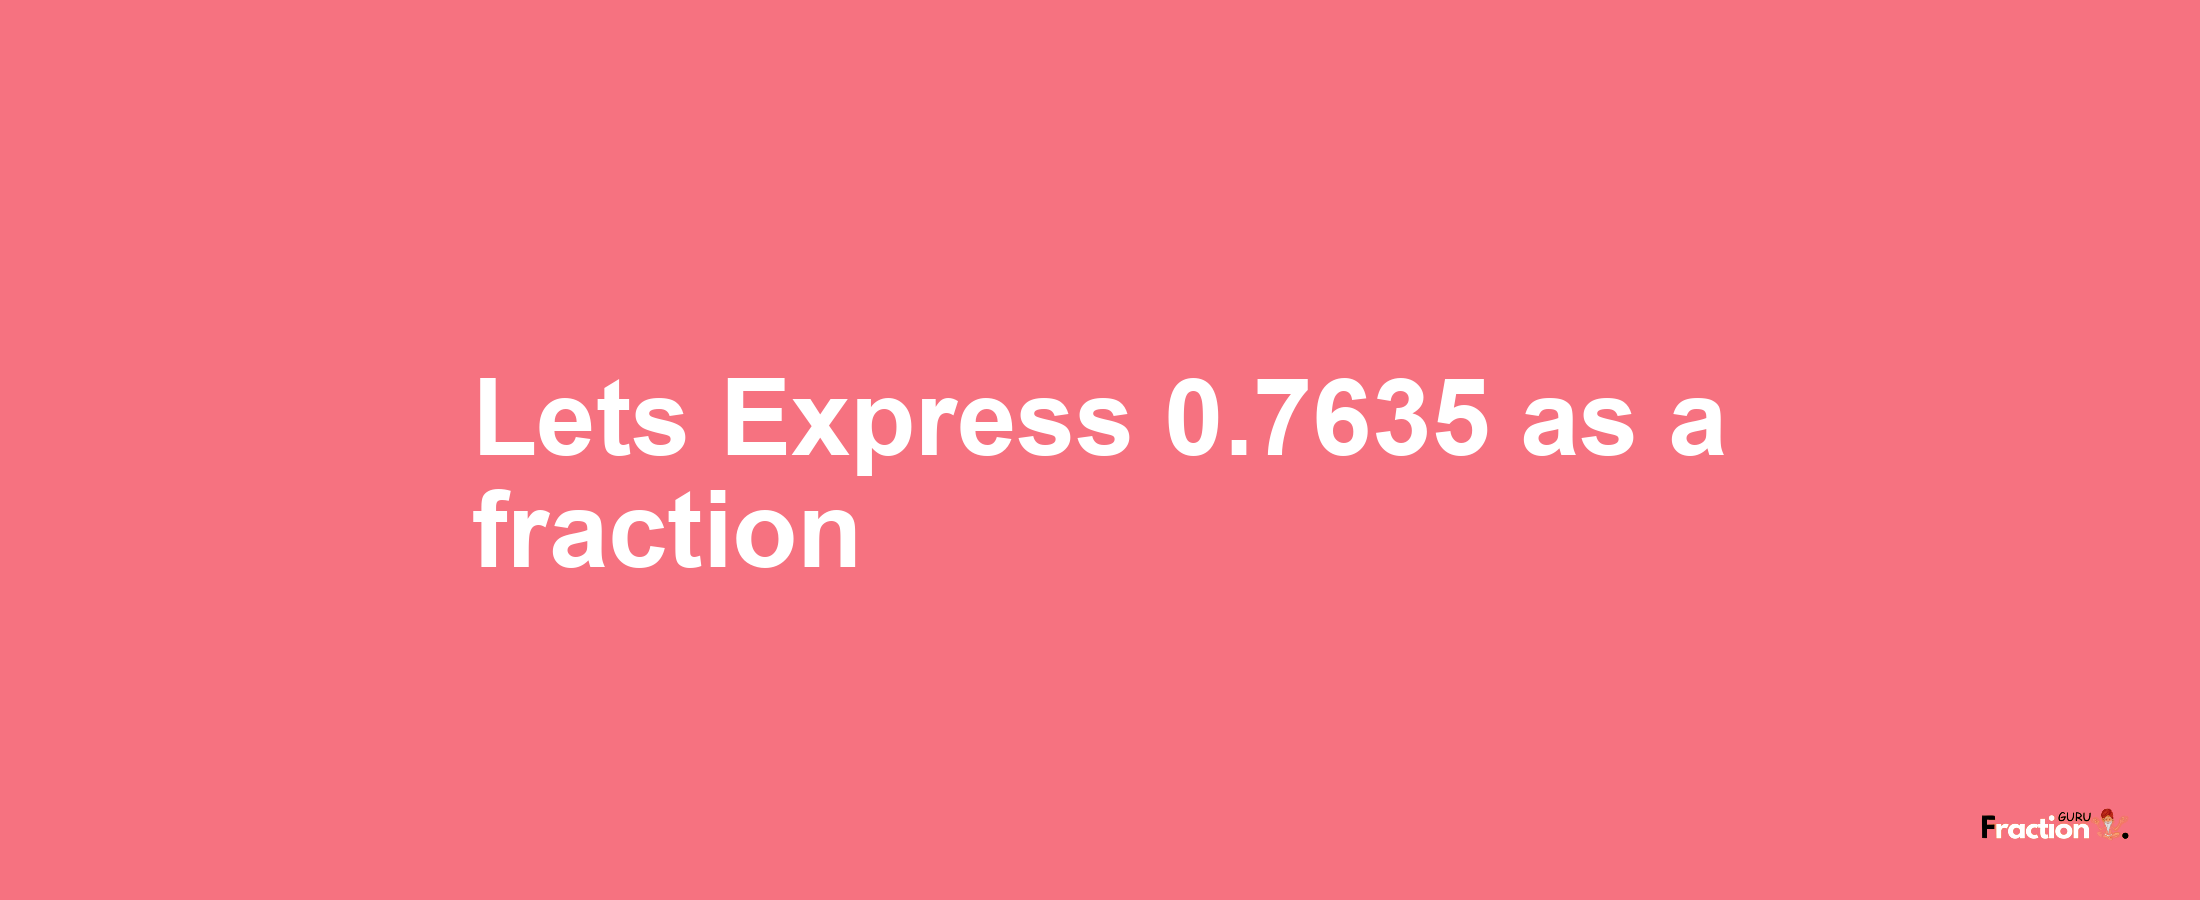 Lets Express 0.7635 as afraction